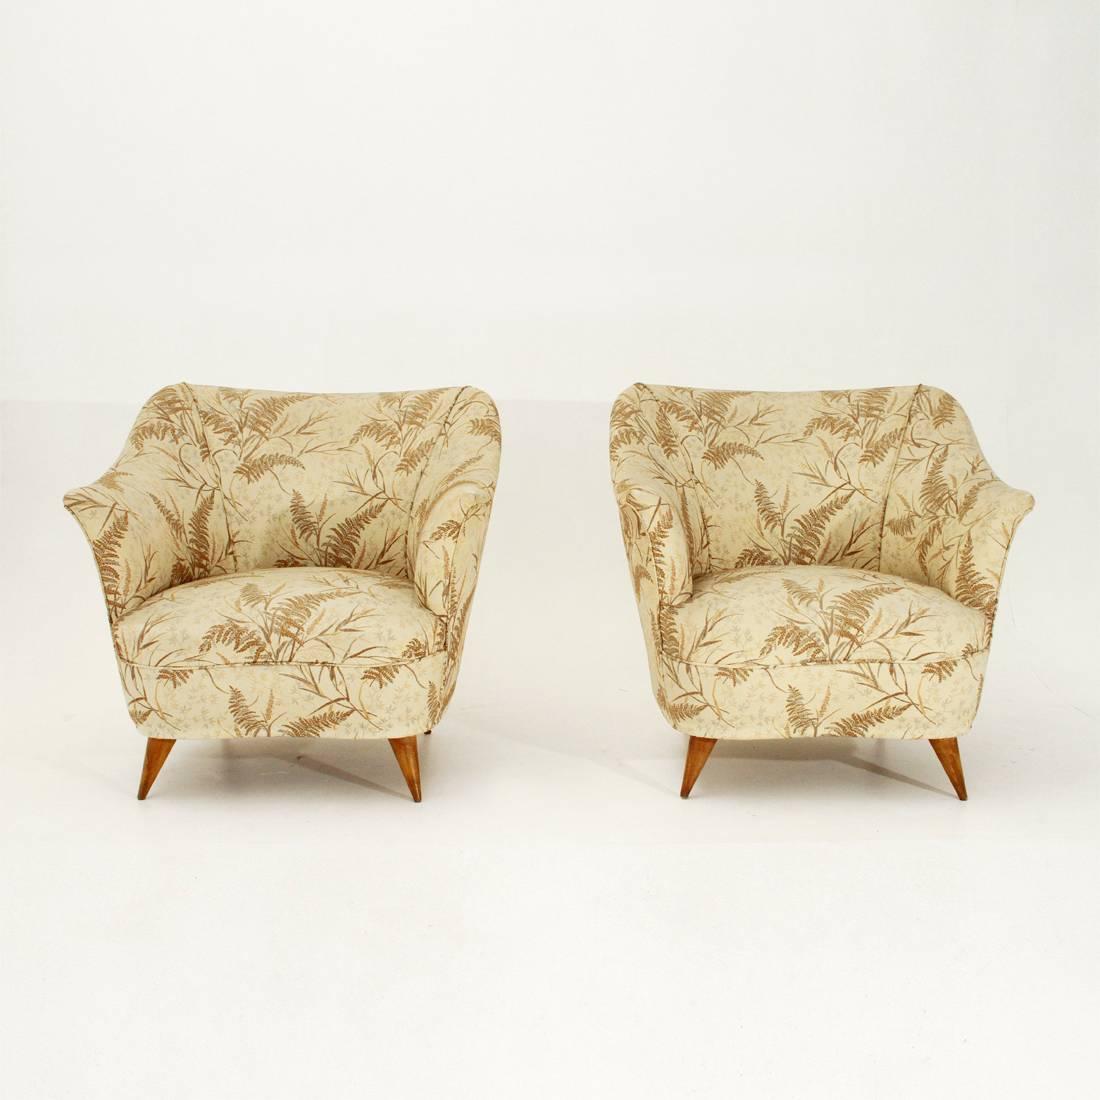 Italian armchairs of the 1950s.
Structure in wood, padded and lined with fabric.
Tapered wooden feet turned.
Very good general conditions.
Dimensions: Width 56 cm depth 80 cm height 84 cm Seat height 36 cm.